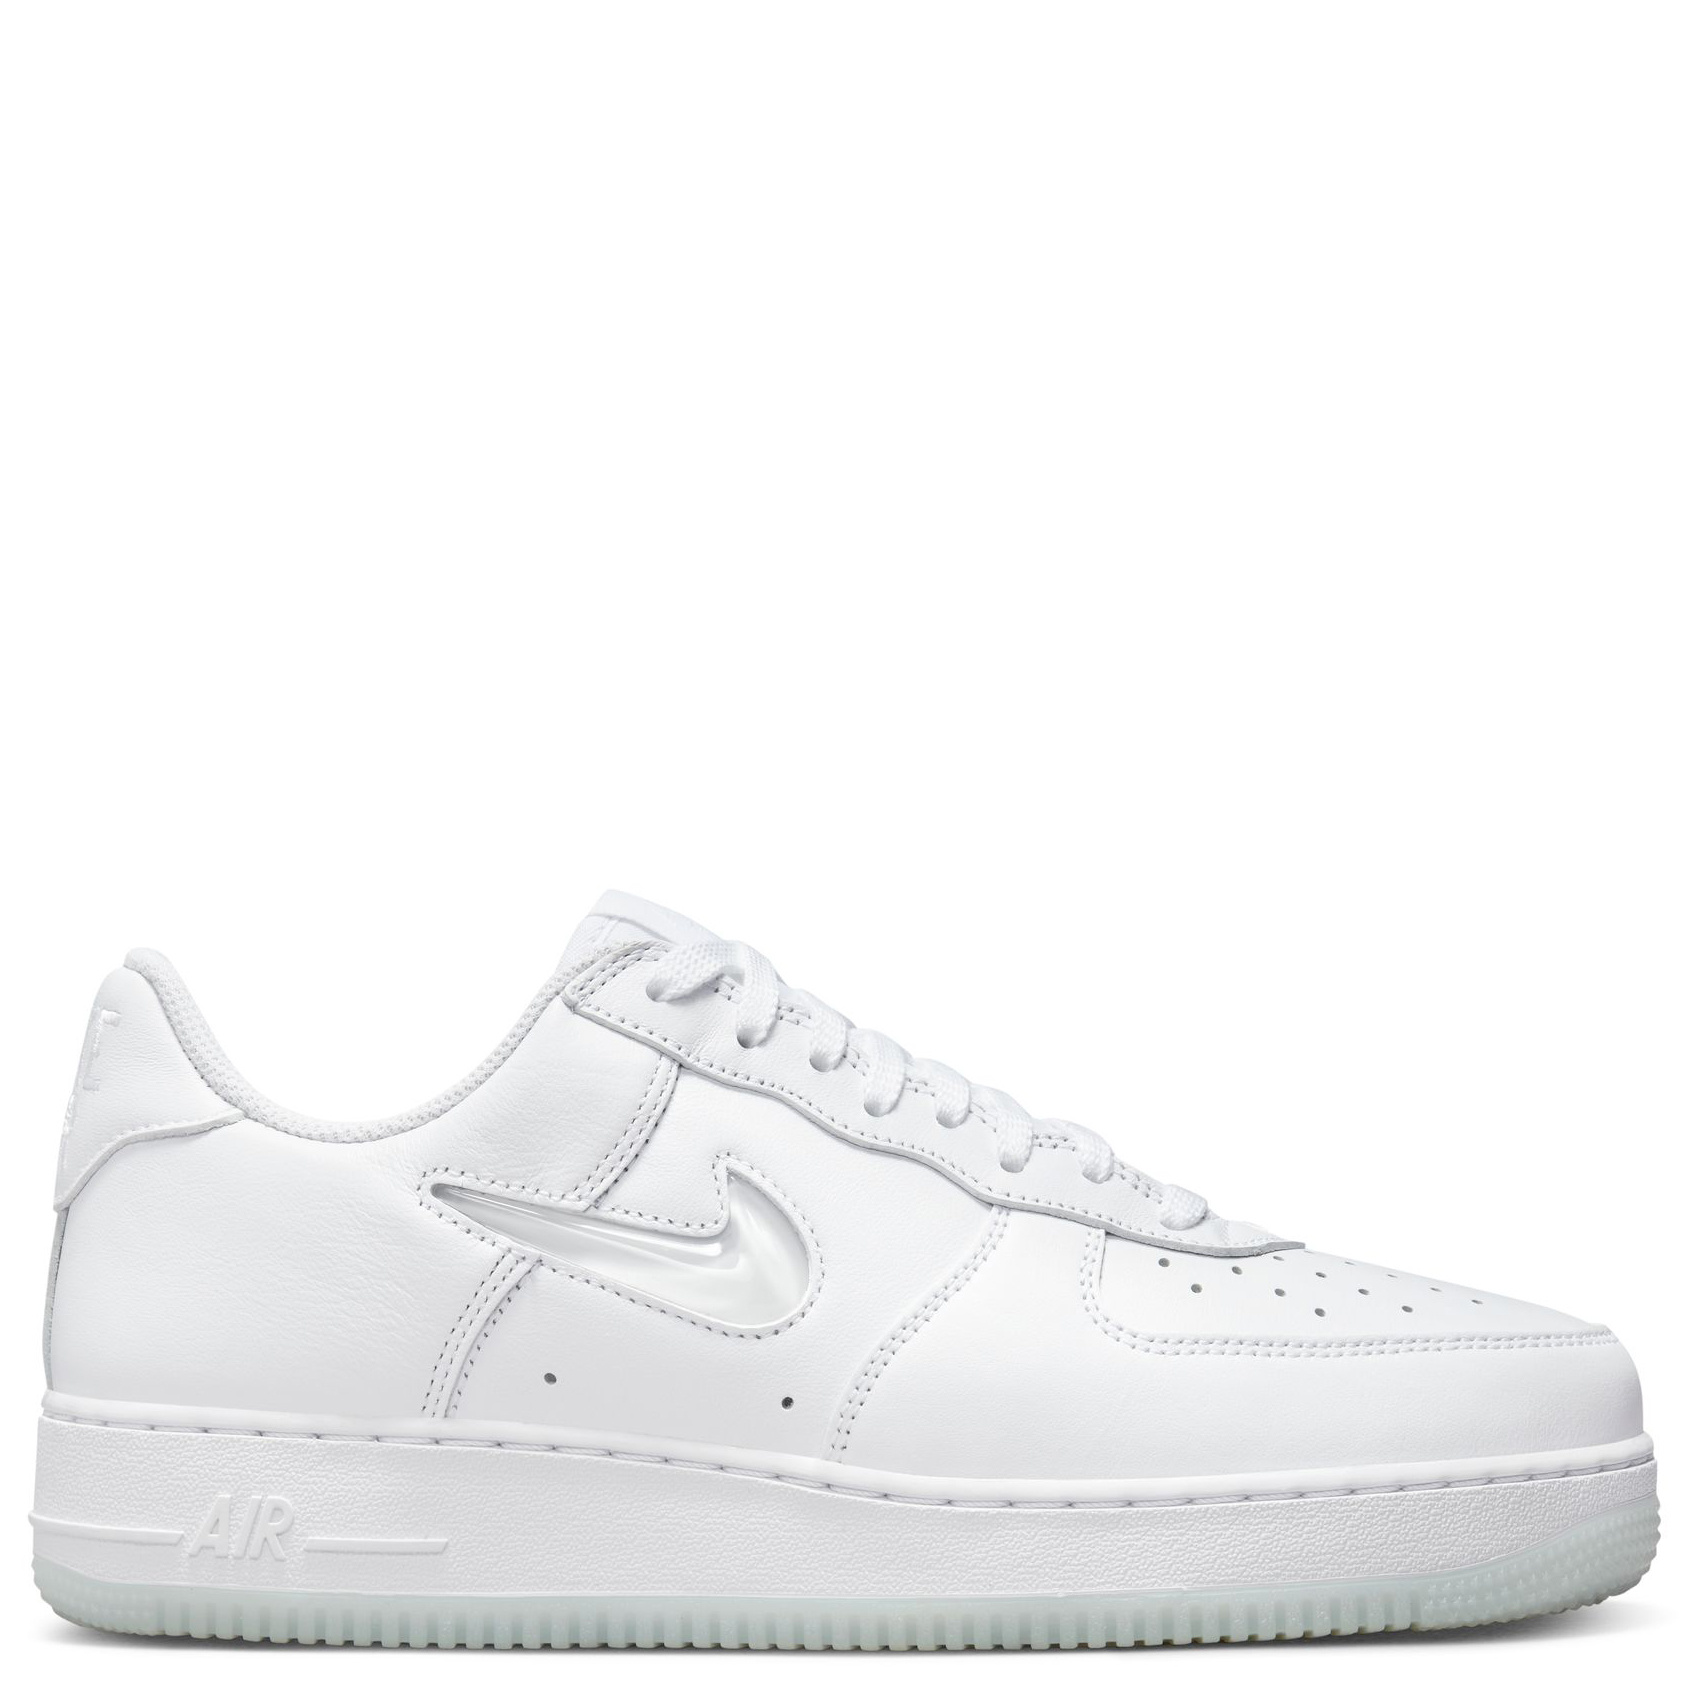 Air Force 1 Low Retro 'Color of Month' - White/White - MODA3